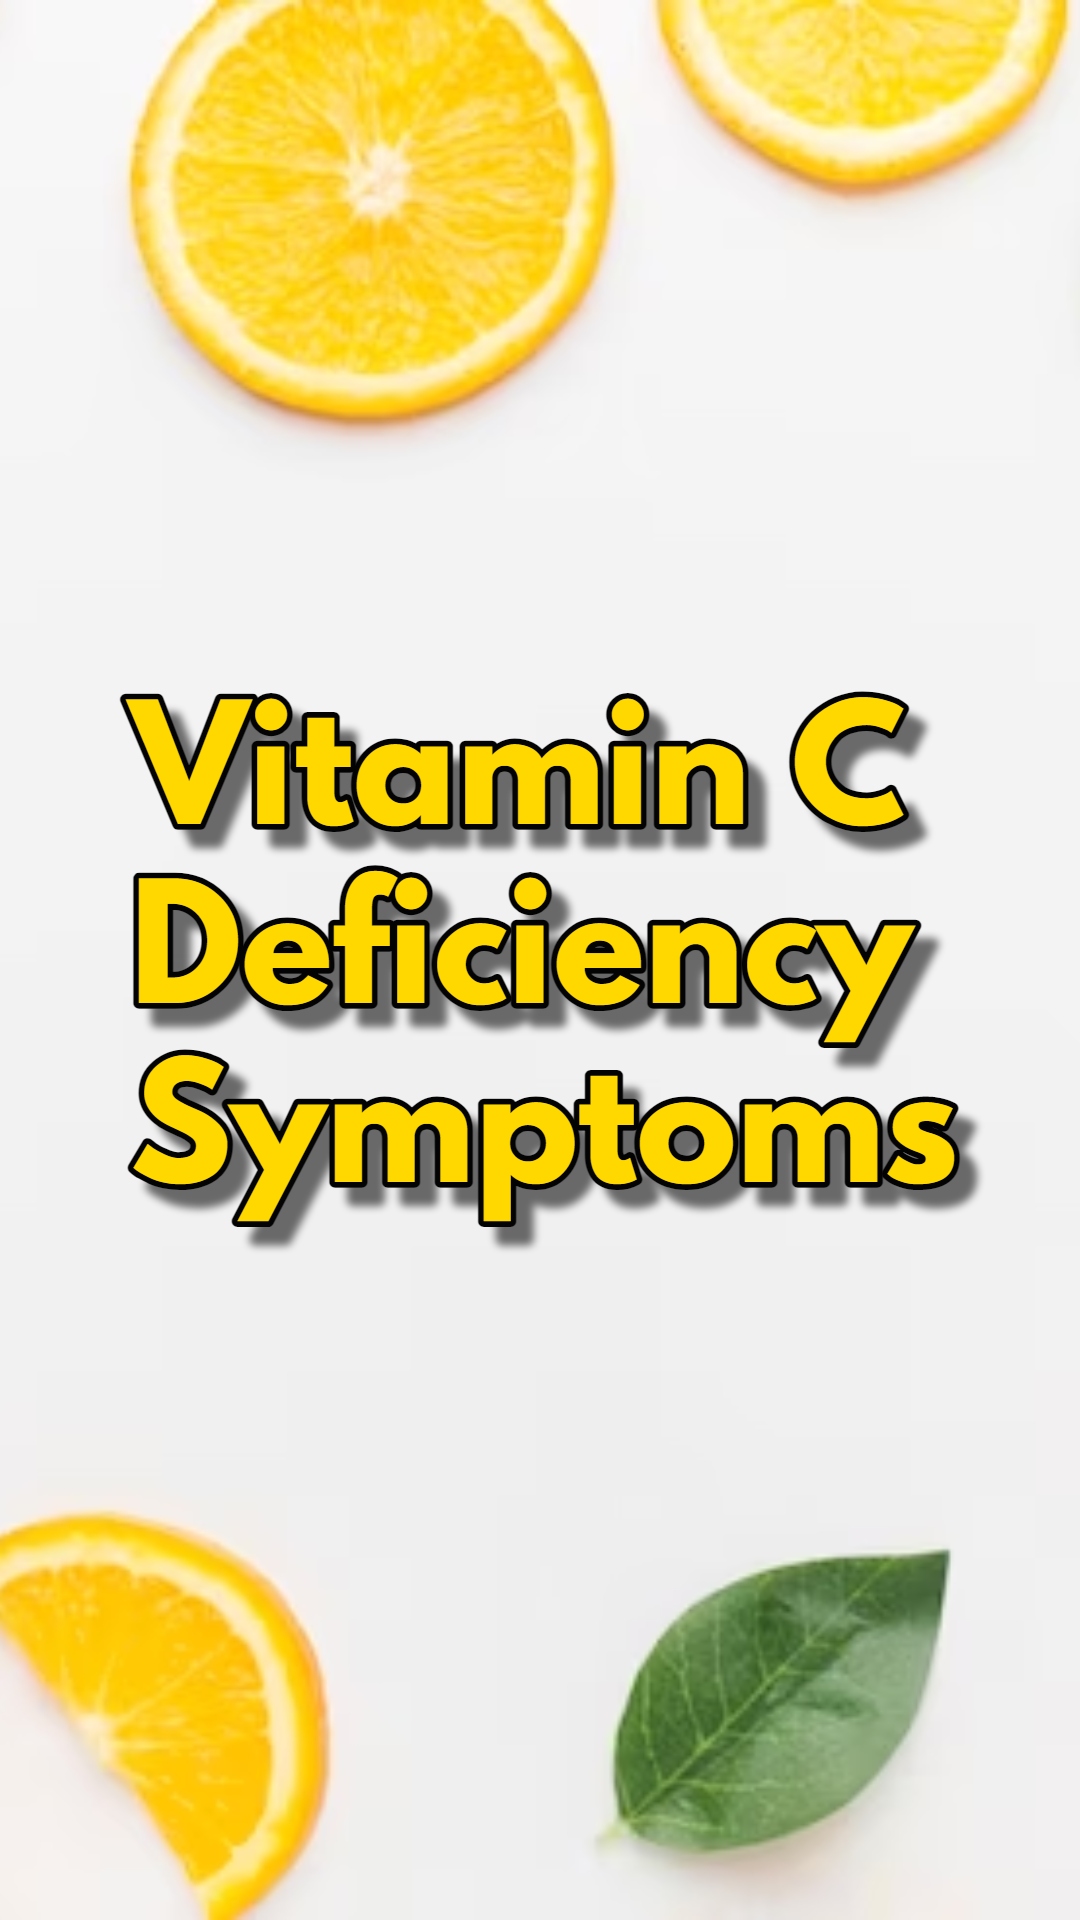 What happens if you have vitamin C deficiency? How can you detect that your vitamin C level is low?